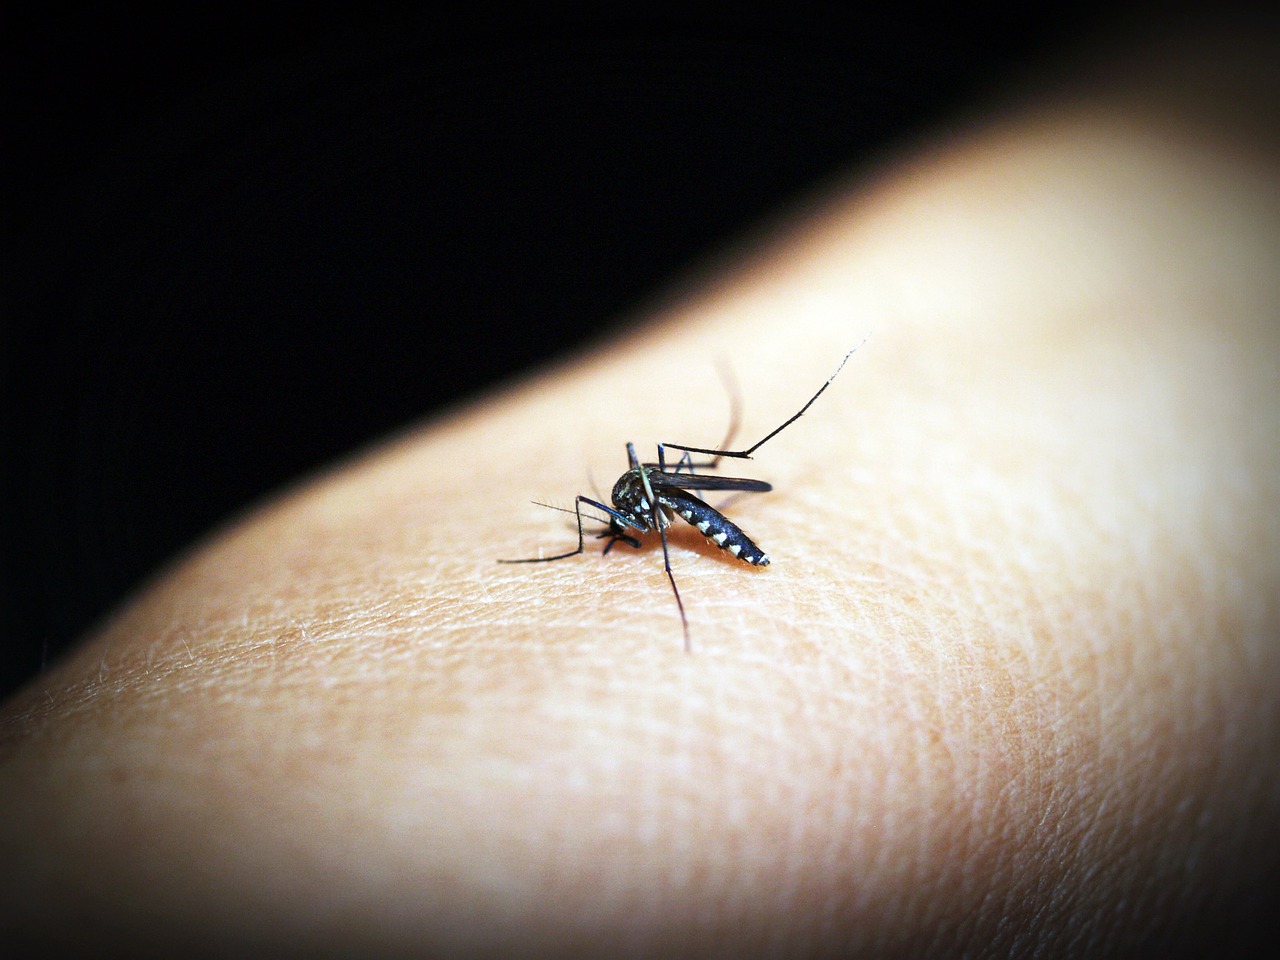 A mosquito landing on a patch of skin.